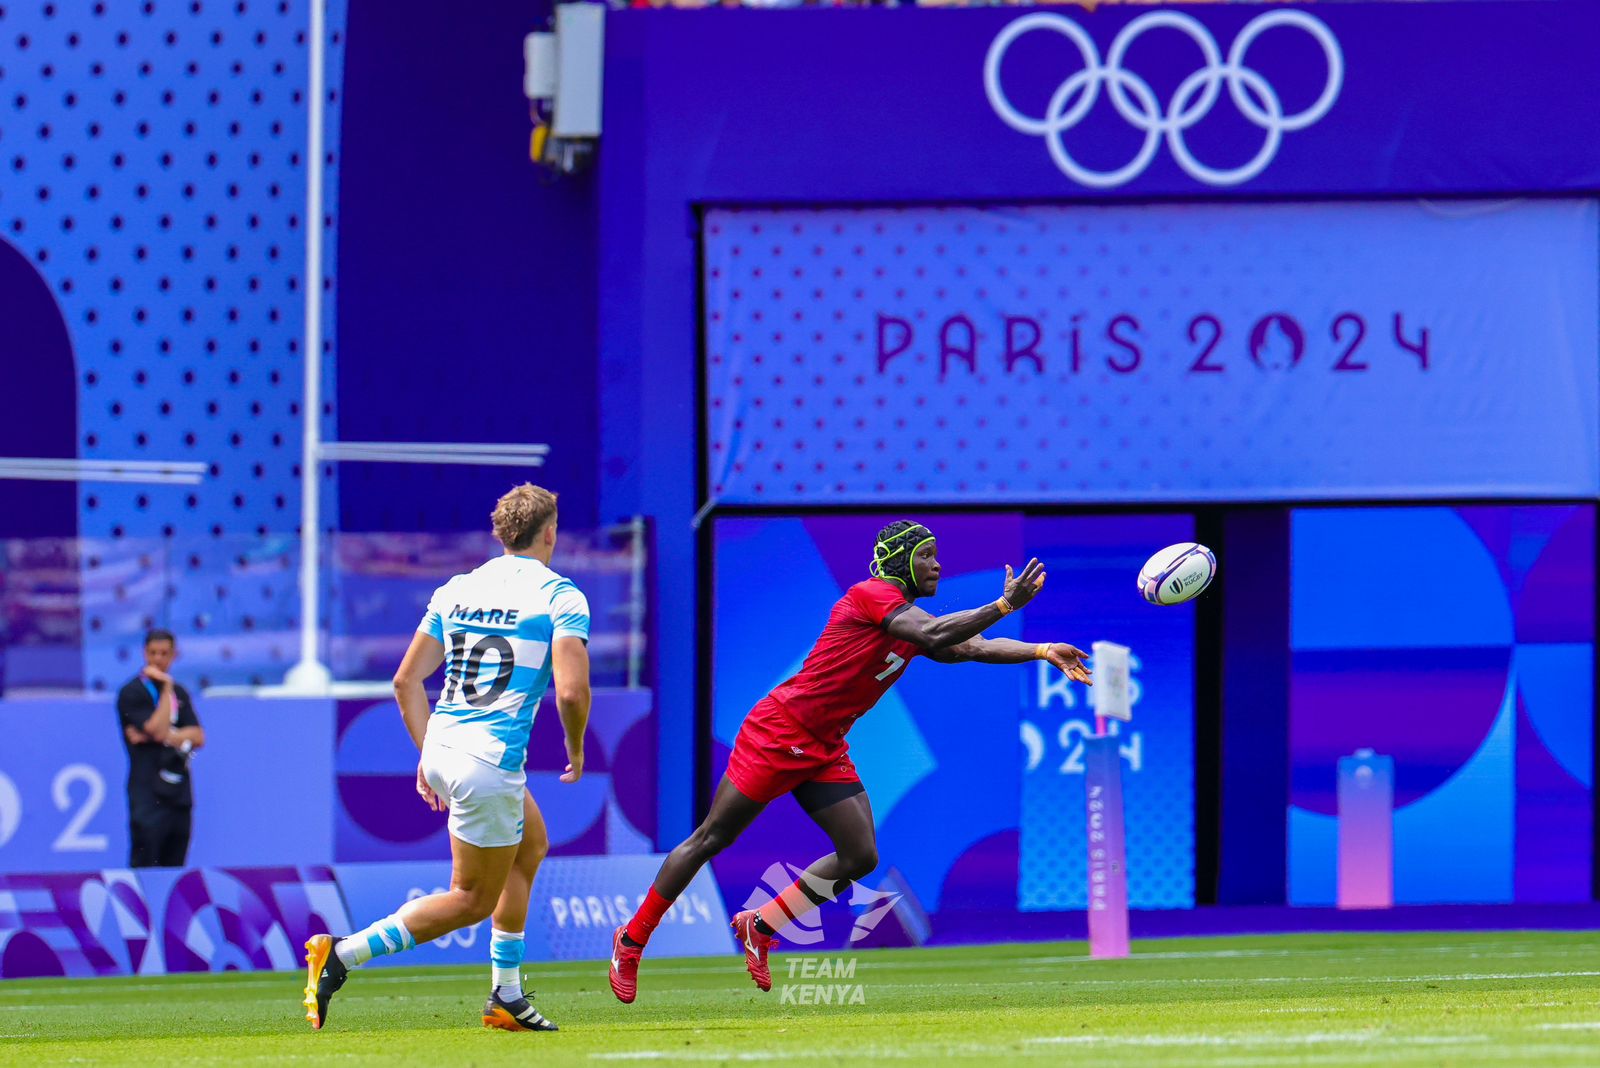 Featured image for PARIS 2024: Young Shujaa falls short against Argentina in Olympic opener